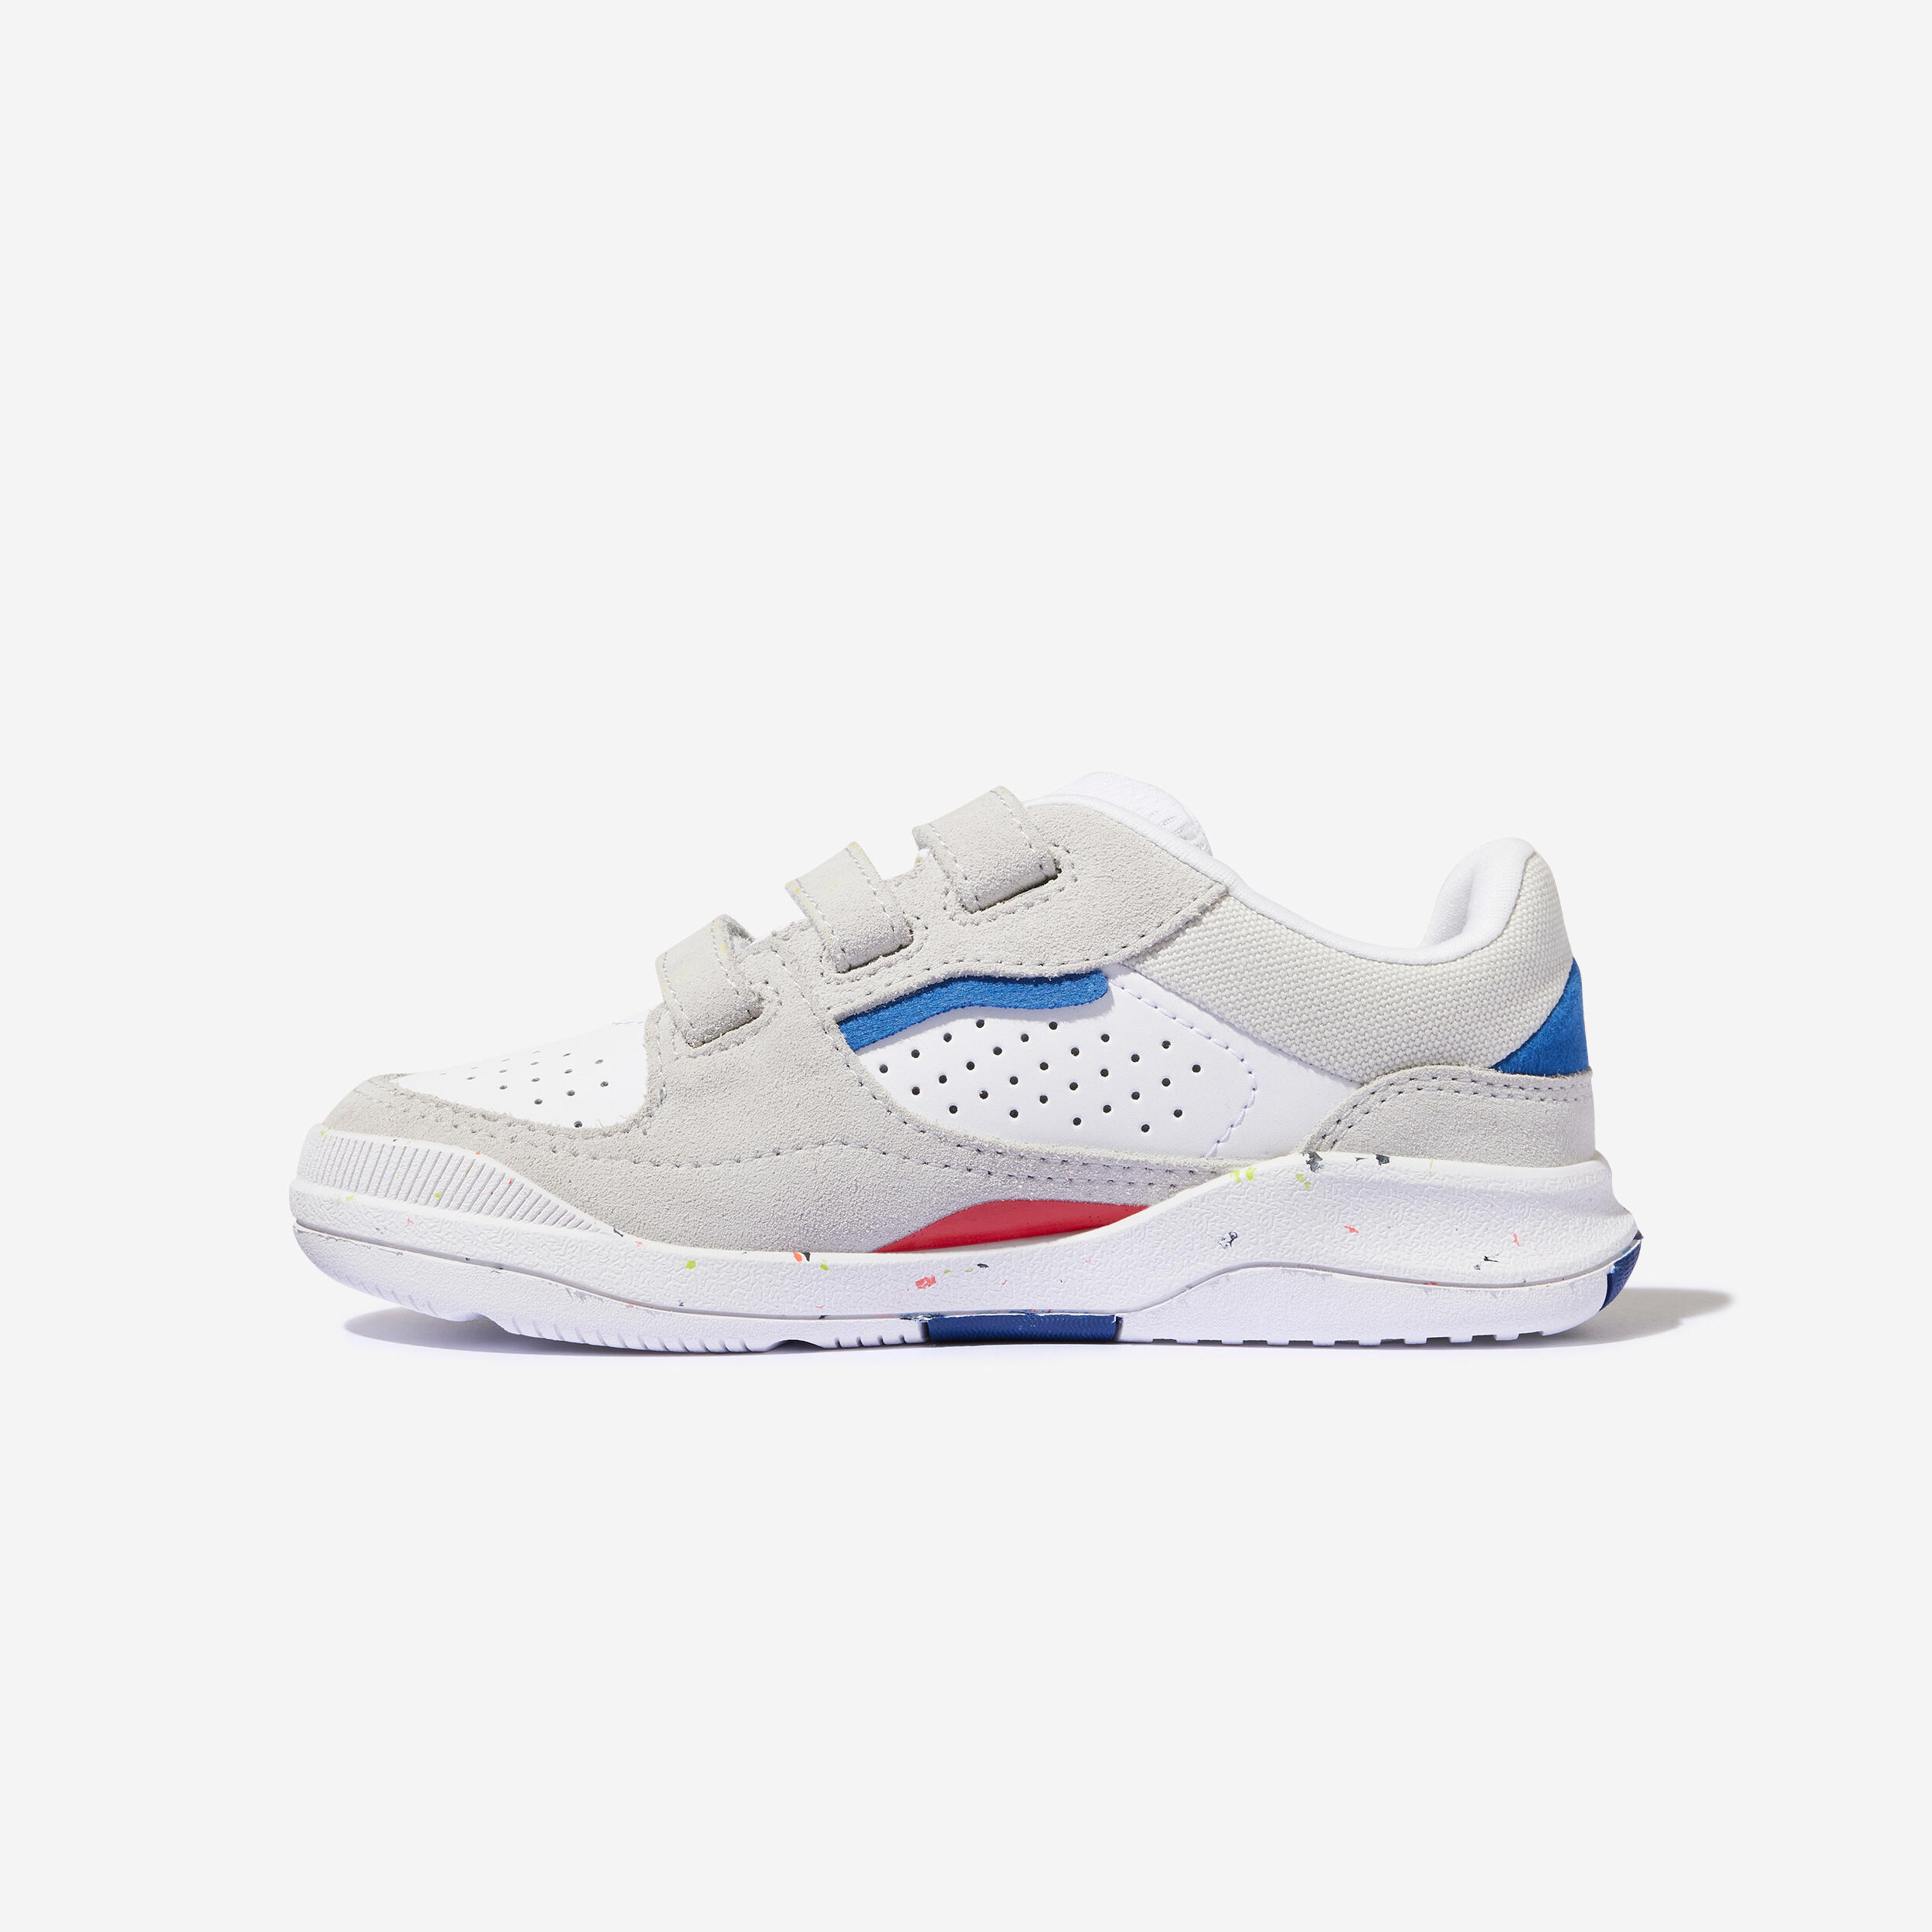 Kids' Lace-Up Shoes Playventure City - White/Blue/Red 2/10